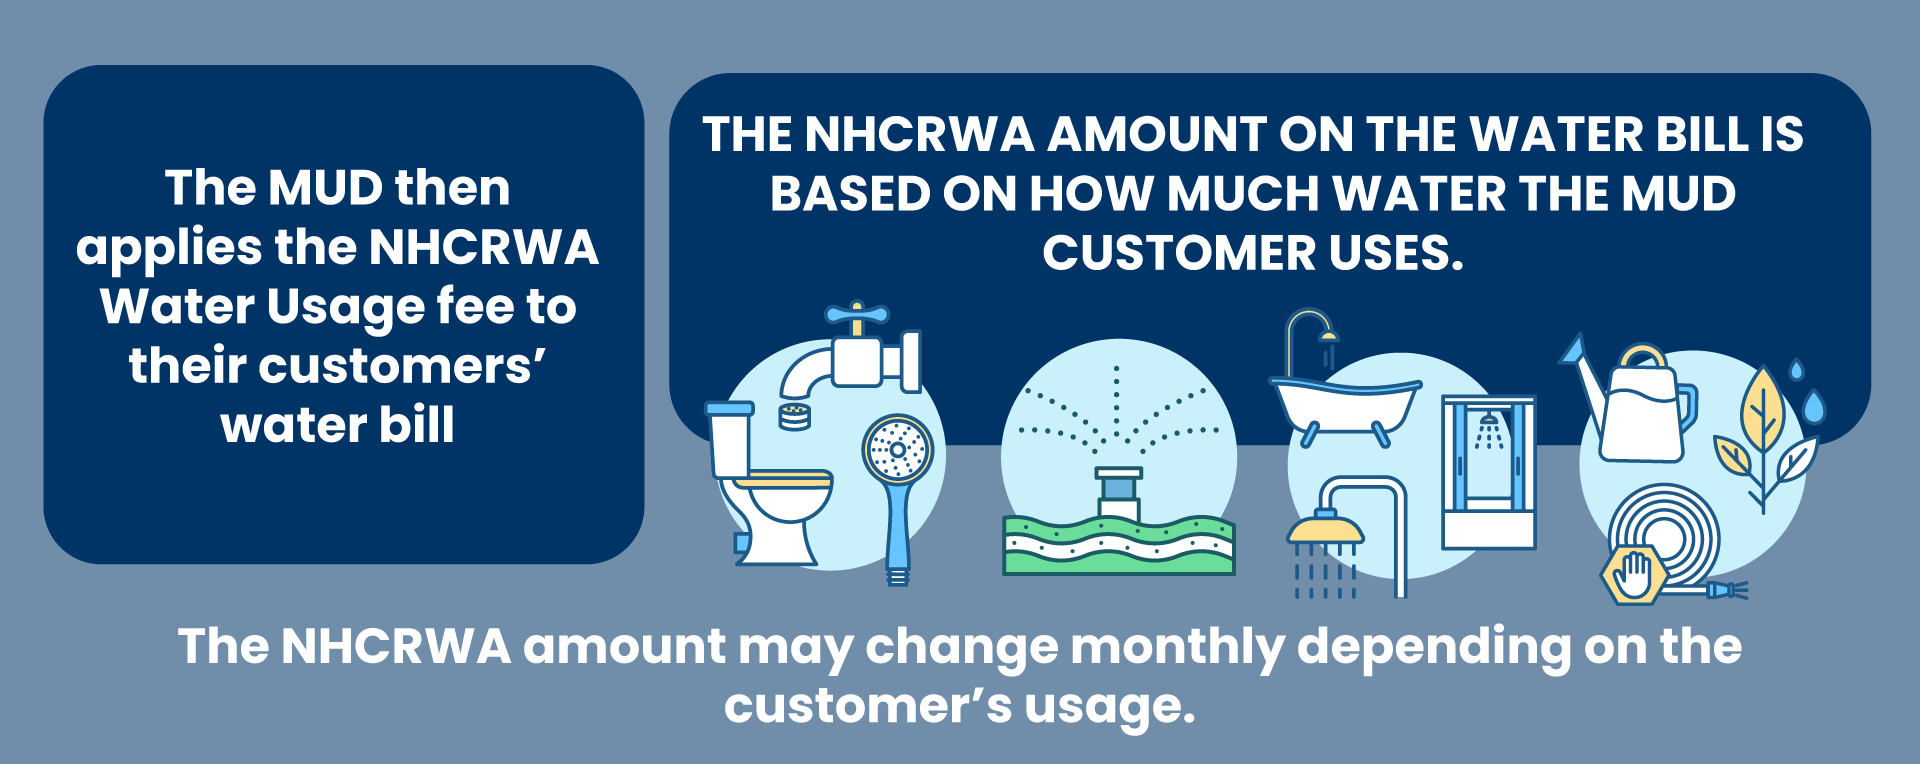 The MUD then applies the NHCRWA Water Usage Fee to their customers water bill